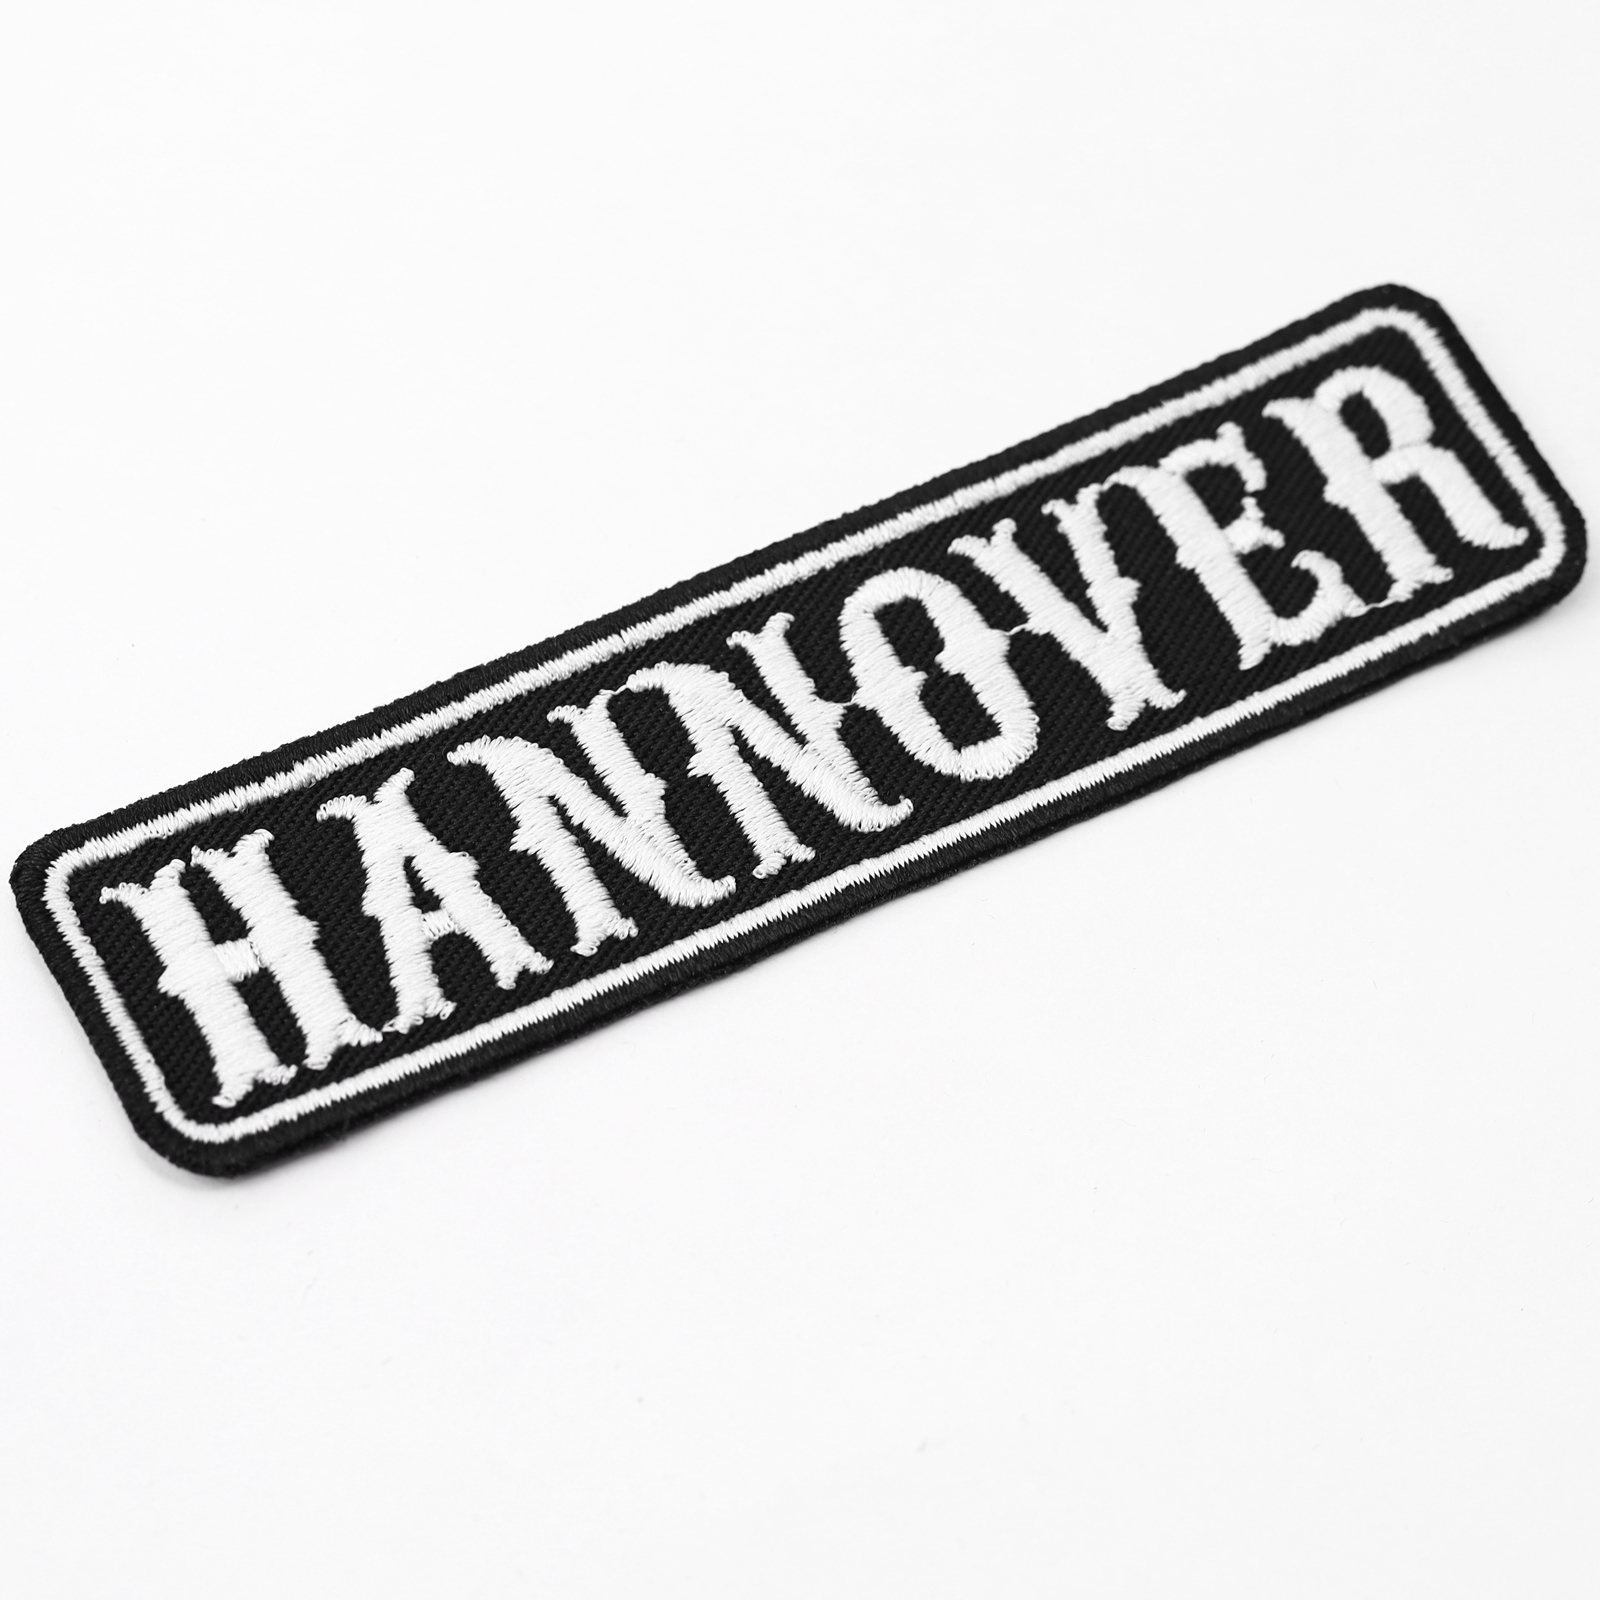 Hannover - Patch